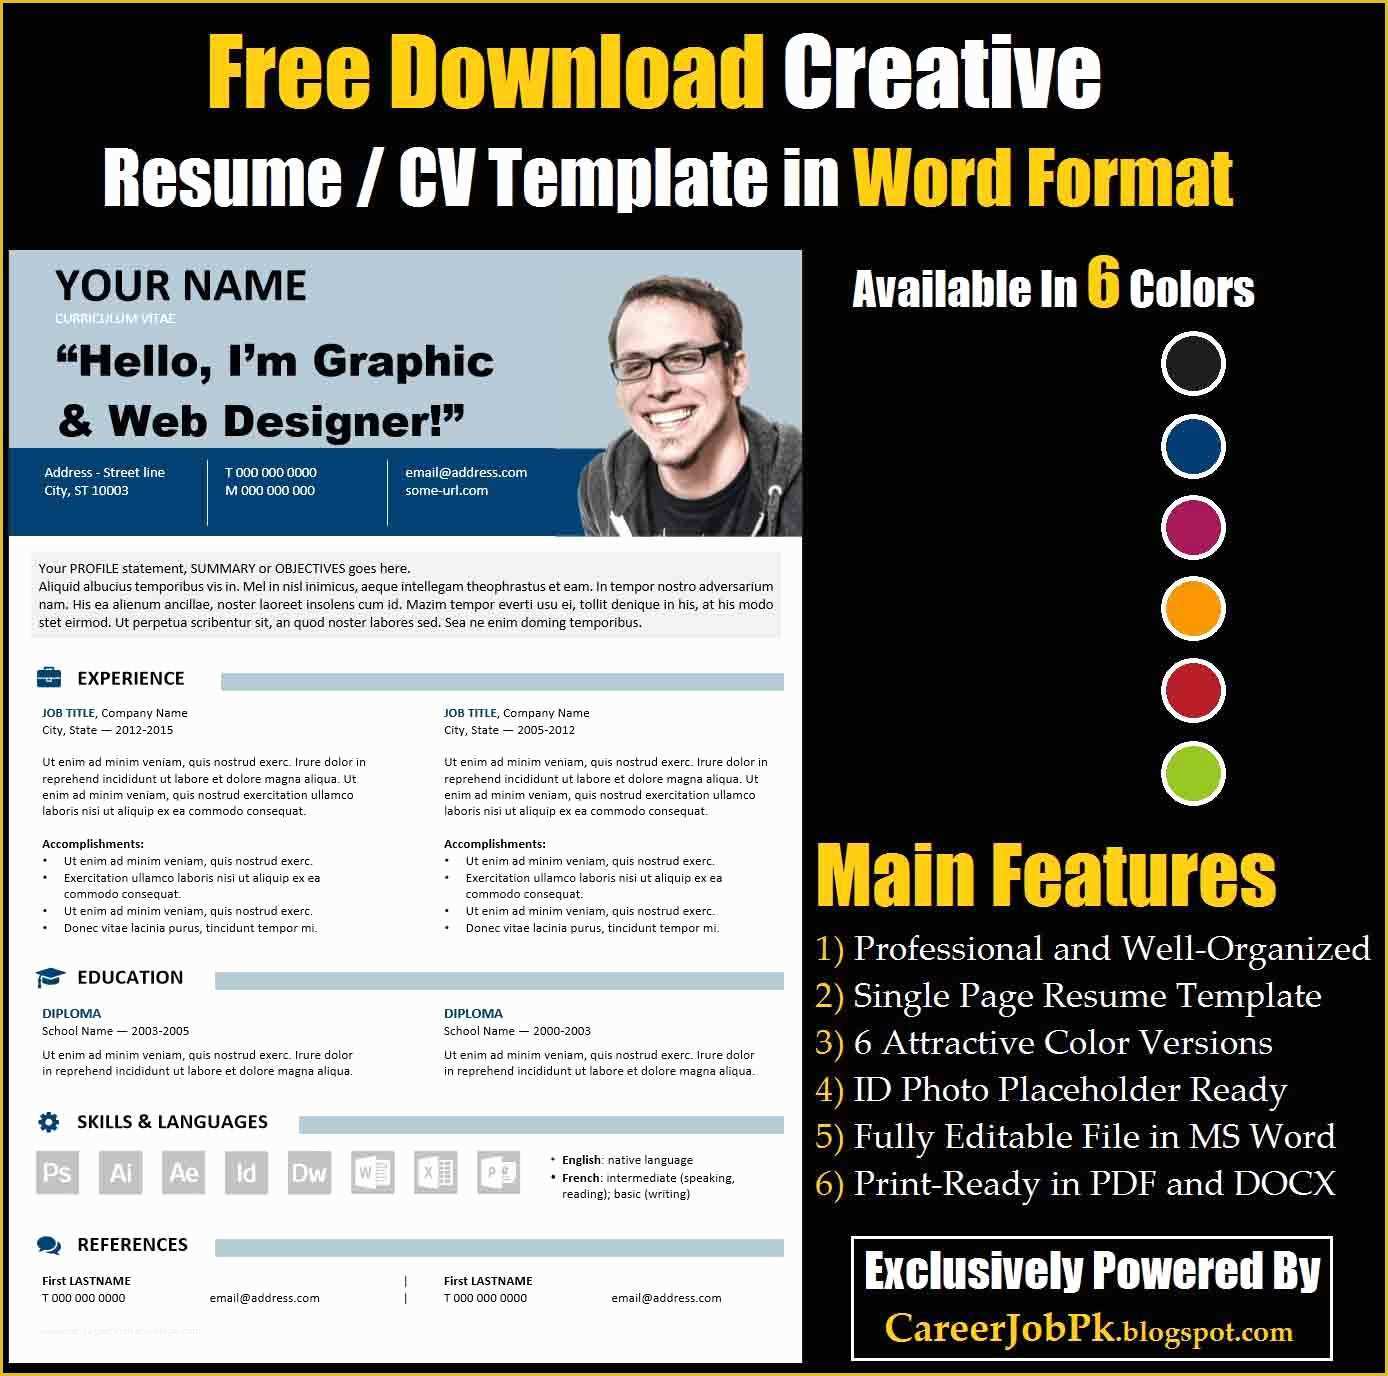 Free Creative Resume Templates Word Of Free Download Editable Resume Cv Template In Ms Word format